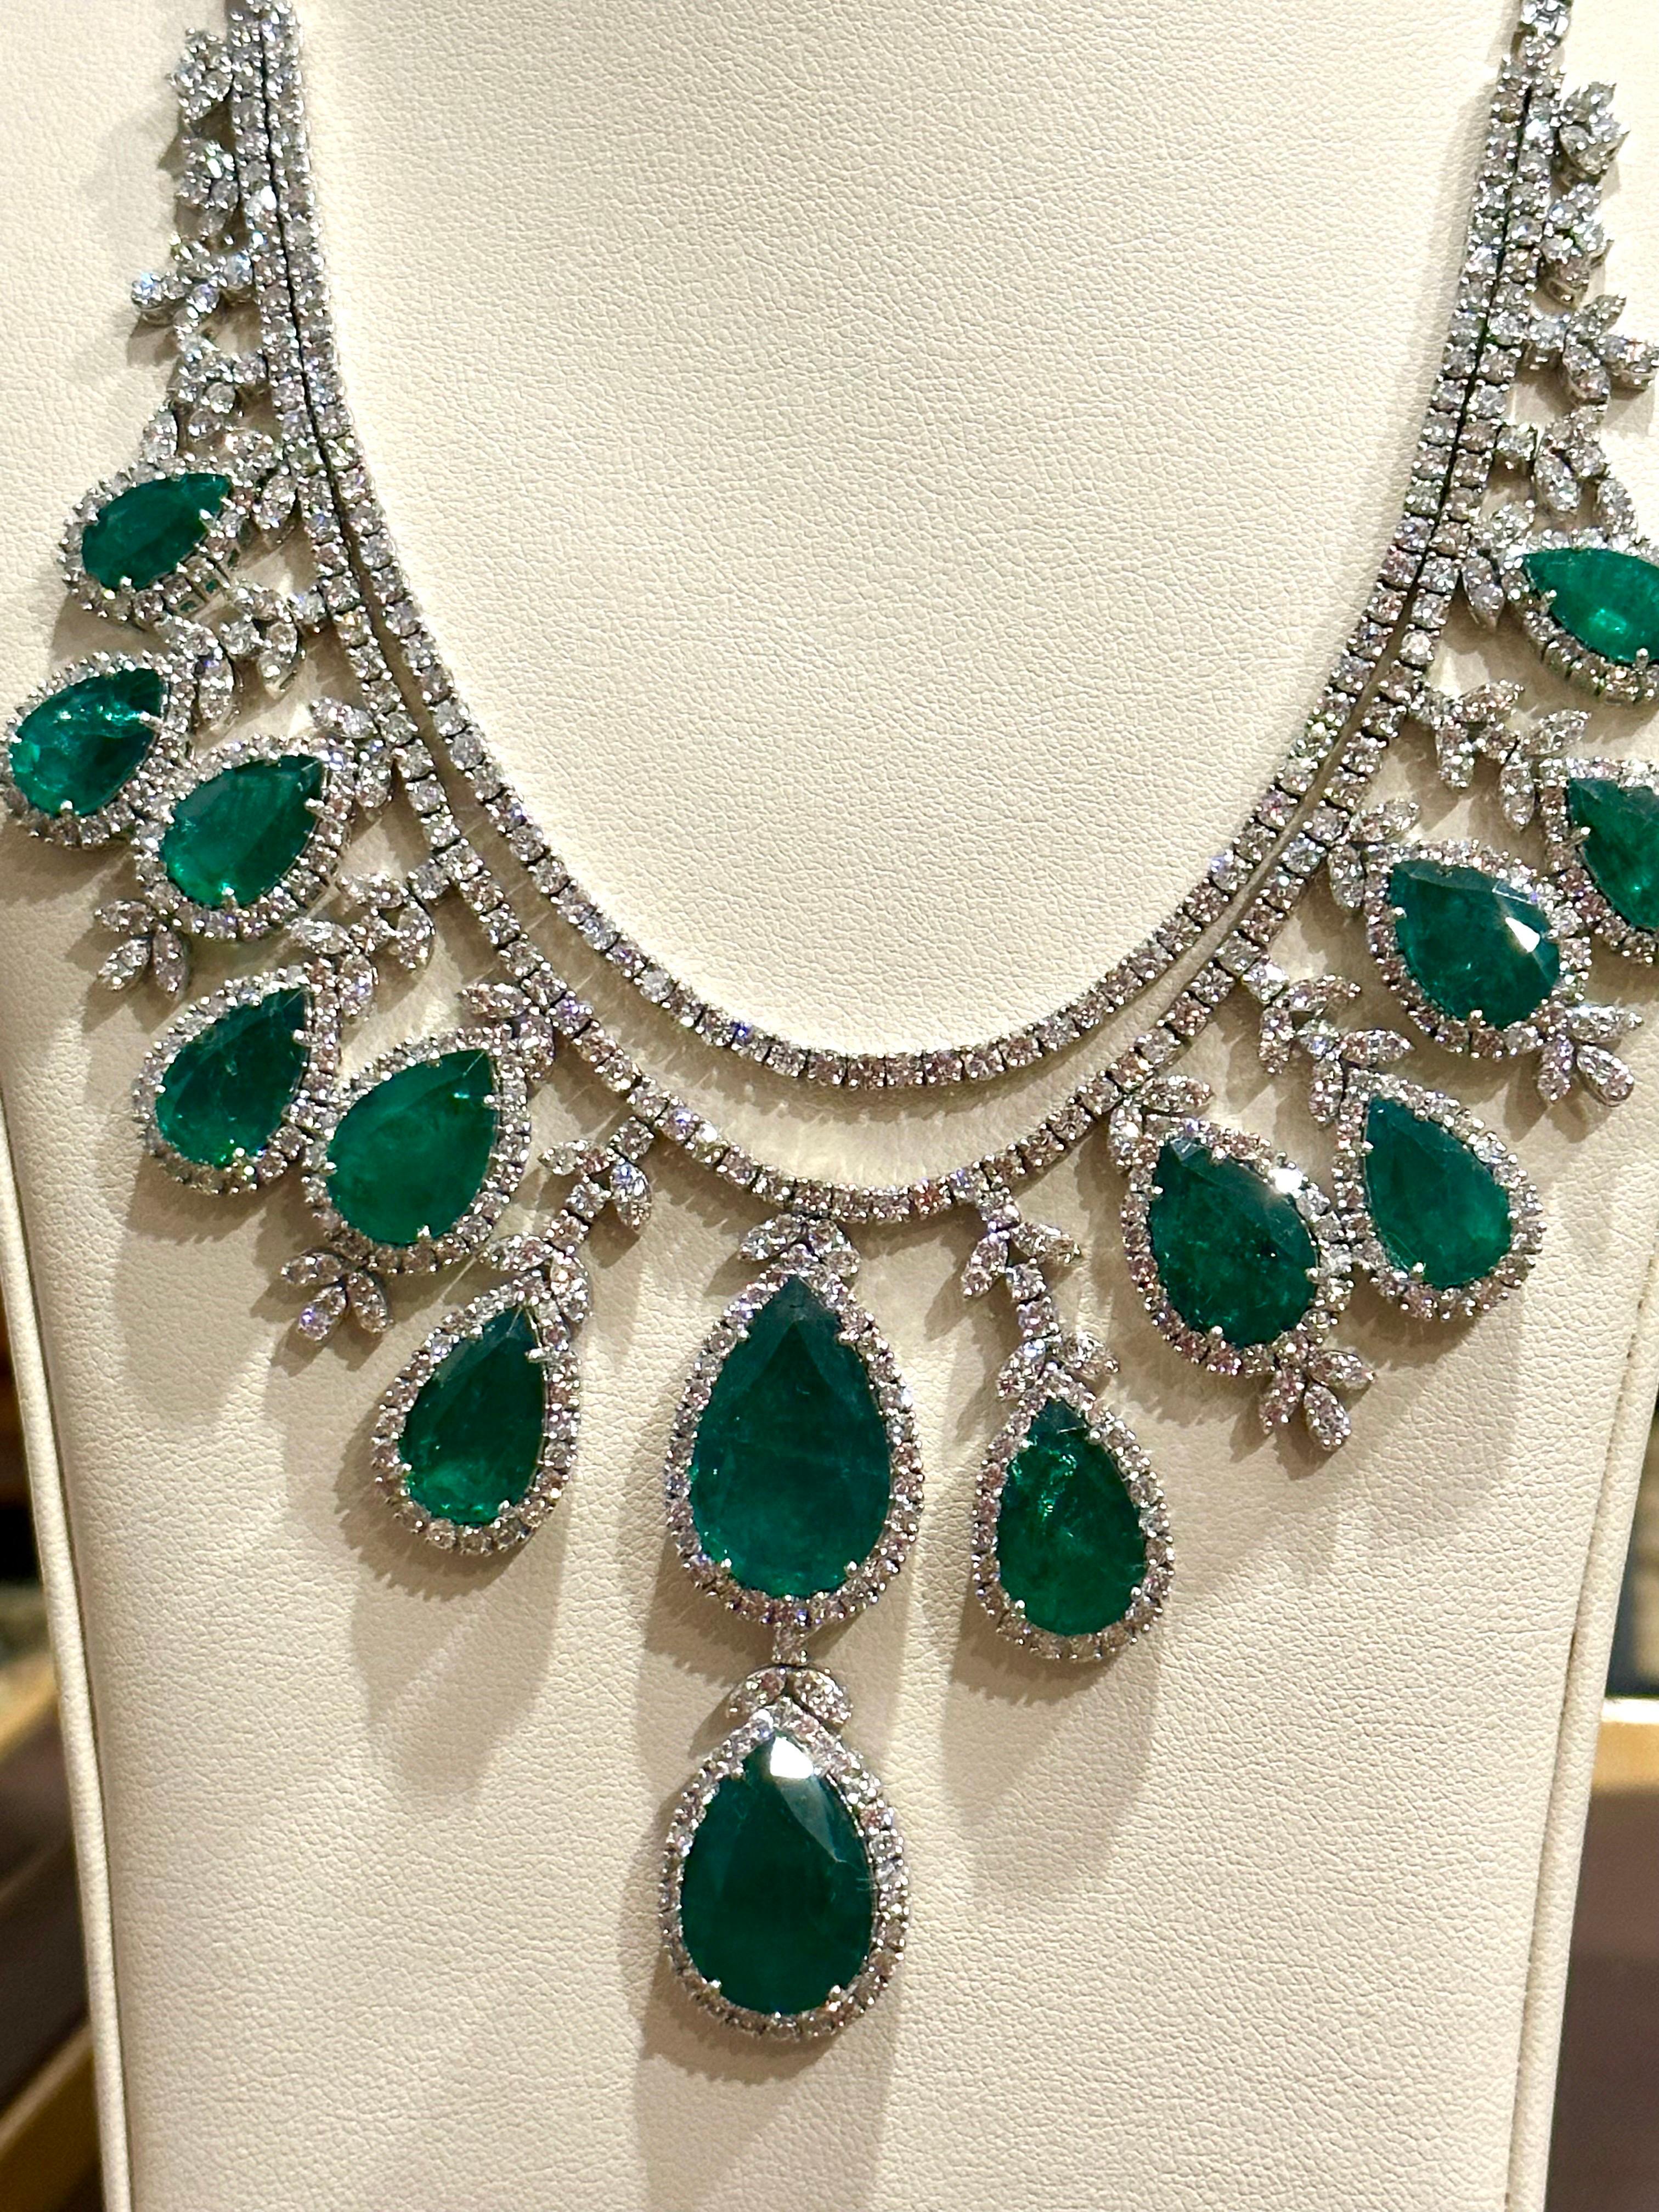 Pear Cut 75 Ct Zambian Emerald and 30 Ct Diamond Necklace and Earring Bridal Suite For Sale